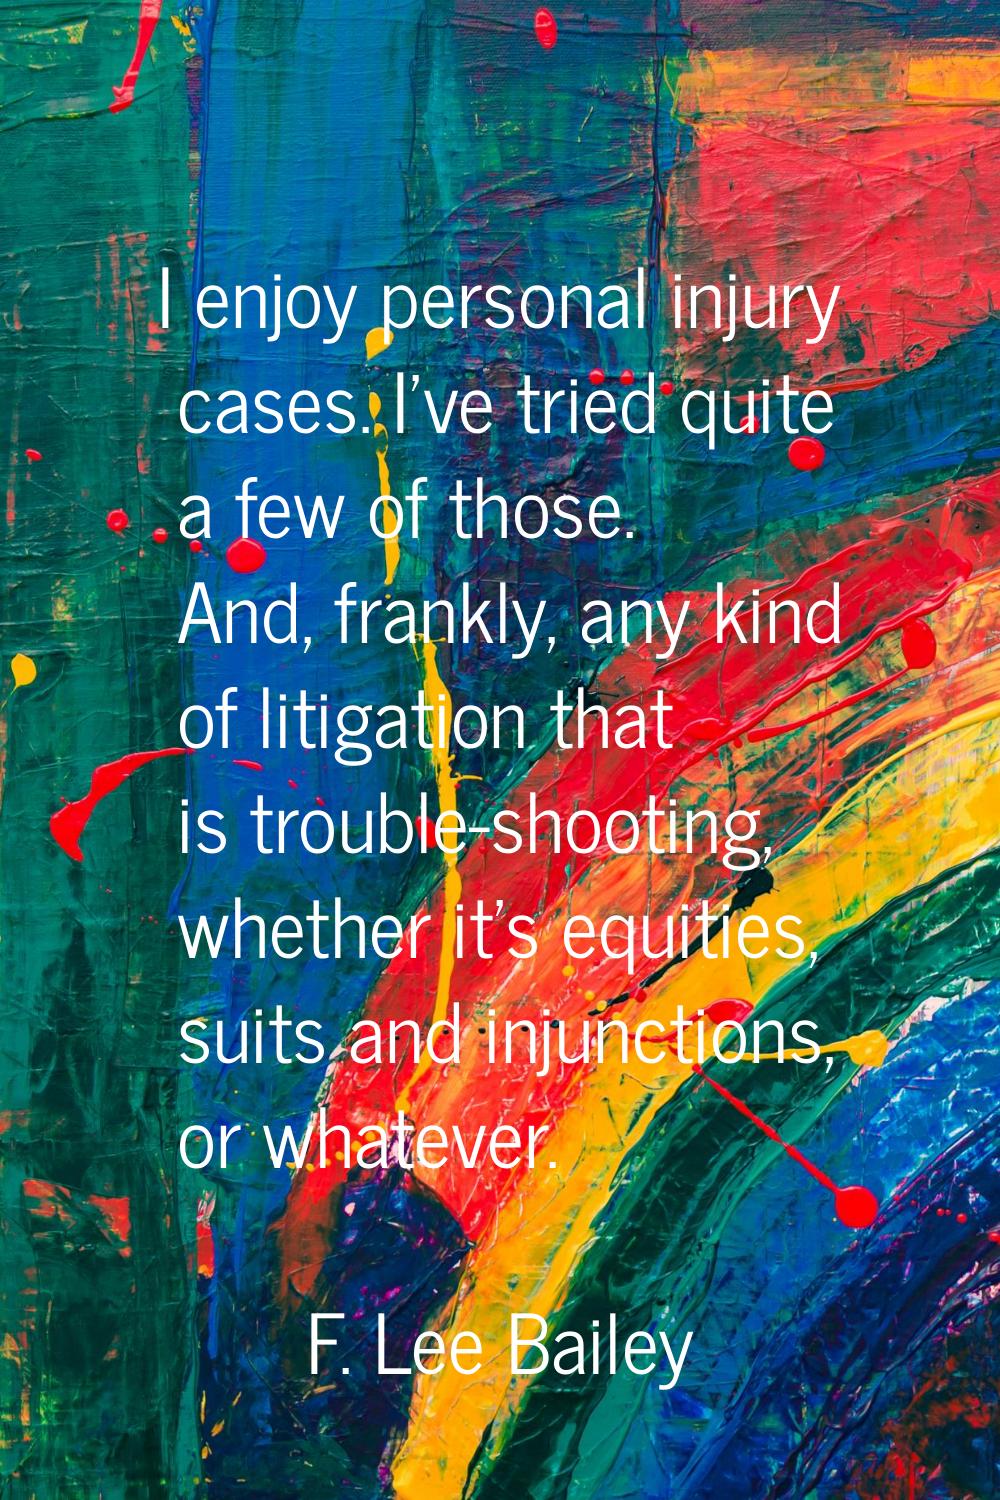 I enjoy personal injury cases. I've tried quite a few of those. And, frankly, any kind of litigatio